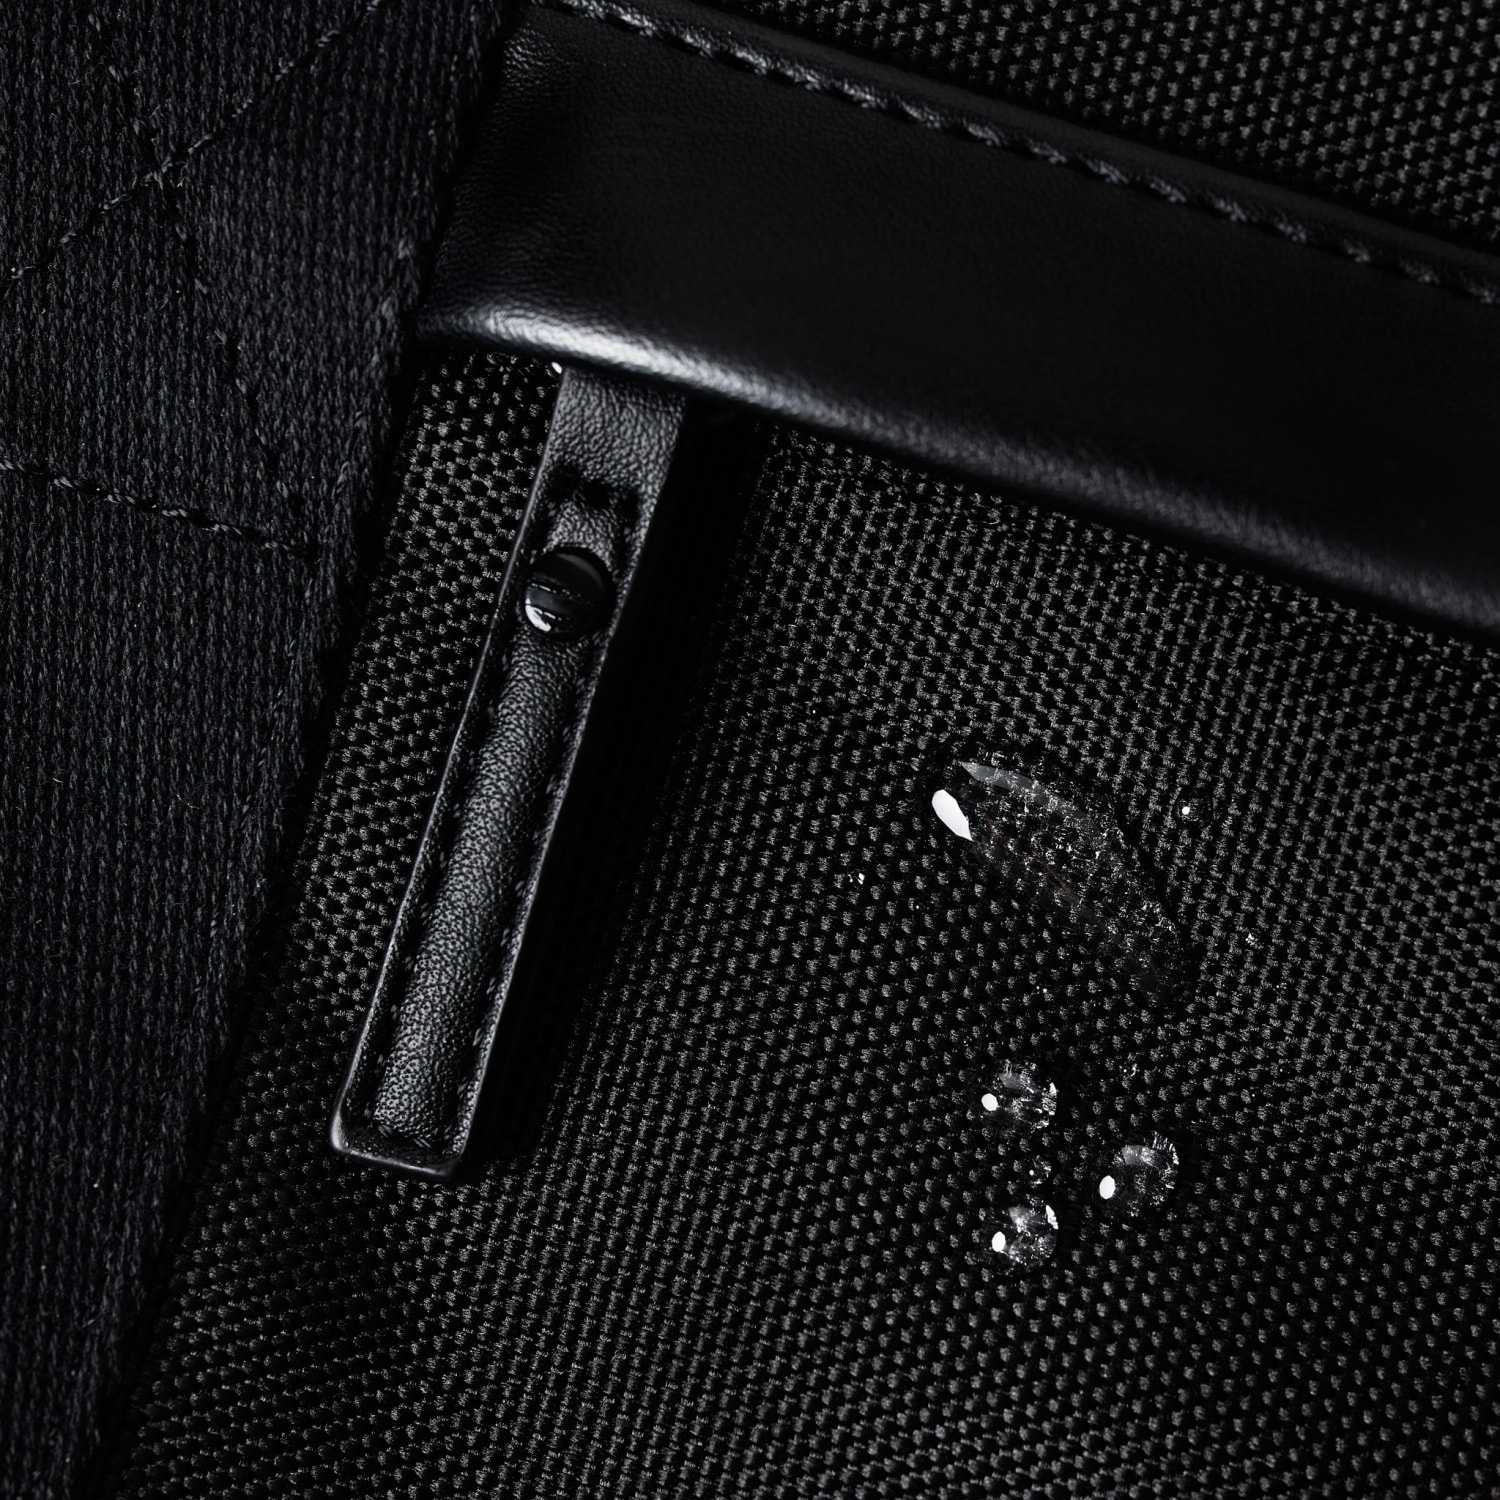 water resistant materials used for the weekend bag